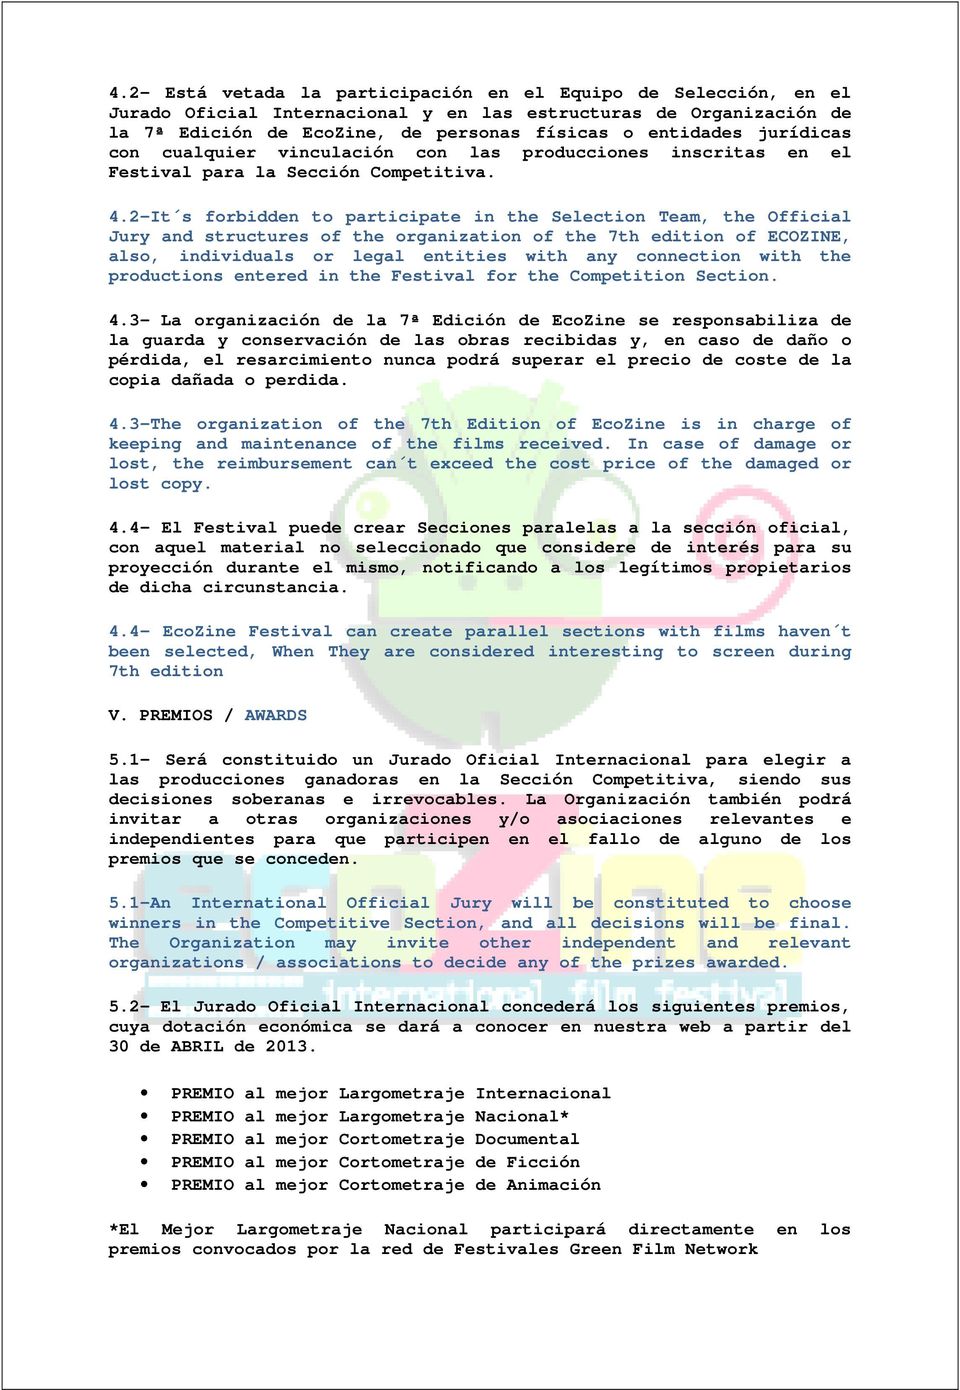 2-It s forbidden to participate in the Selection Team, the Official Jury and structures of the organization of the 7th edition of ECOZINE, also, individuals or legal entities with any connection with